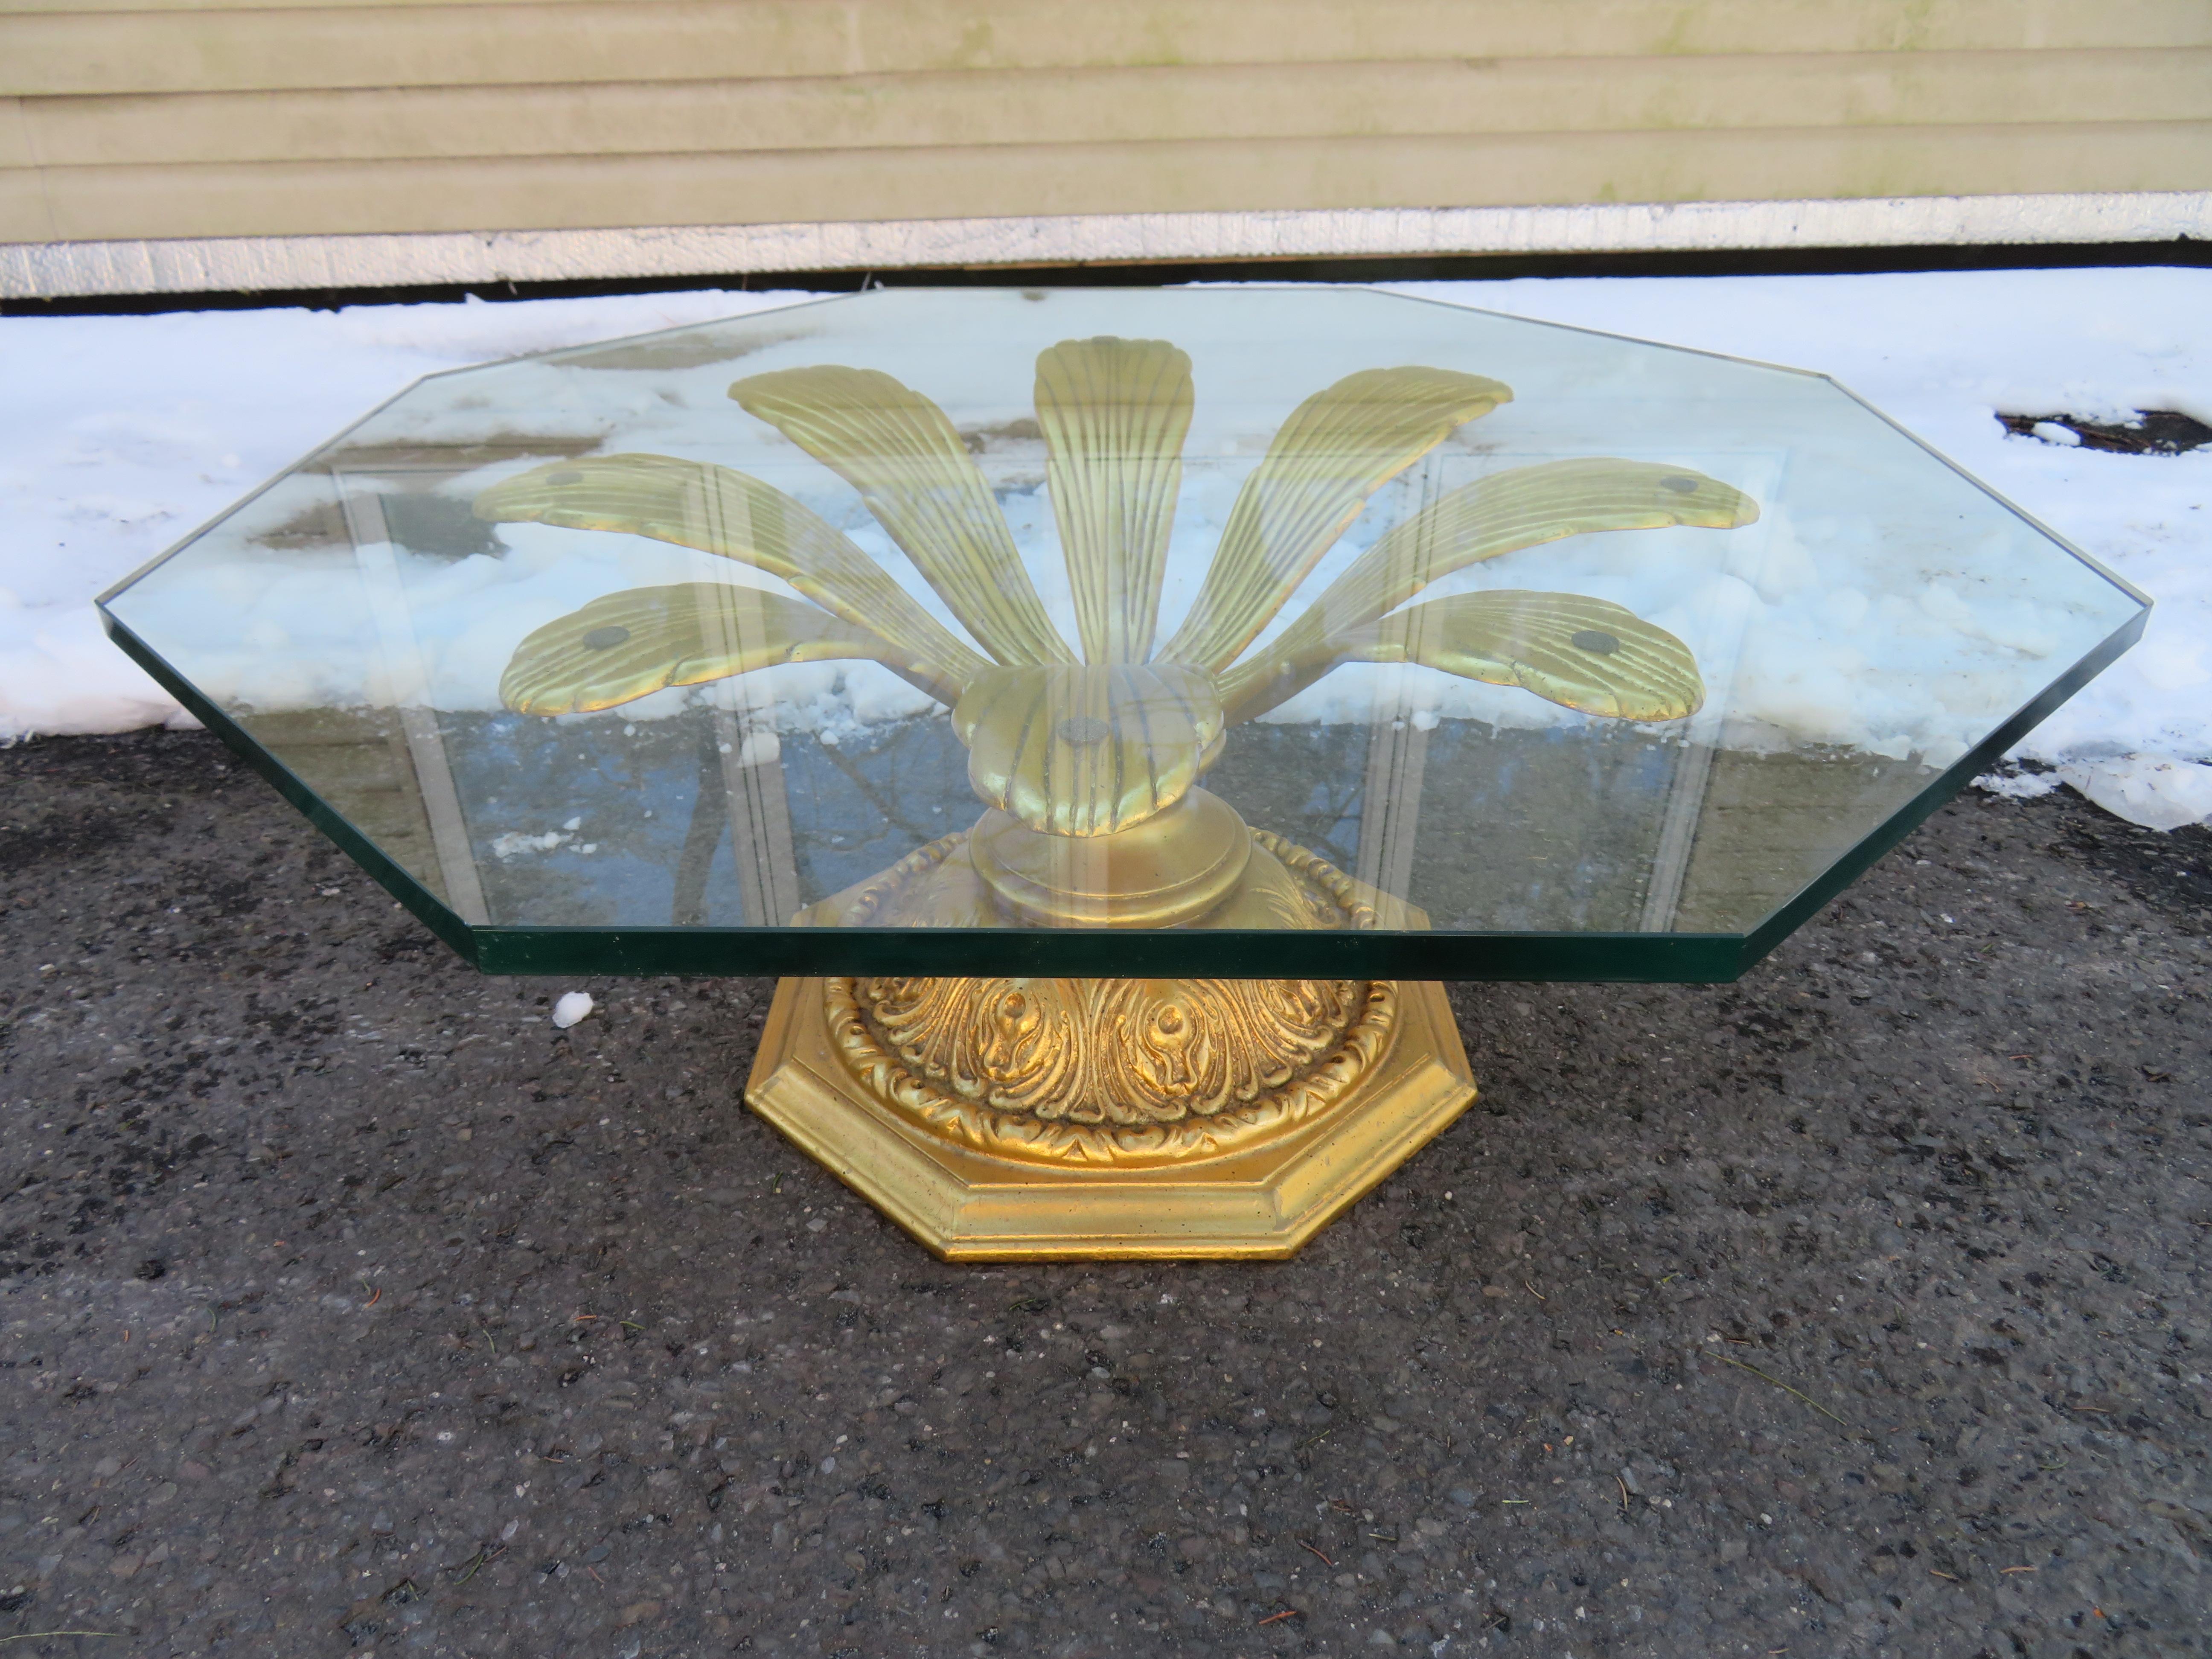 Spectacular vintage Hollywood Regency coffee table in the style of Arthur Court. Heavy, metal base gilded with gold and black fleck color paint. Elegant blossoming form. Outstanding craftsmanship with steadfast welds. A functional work of art sure